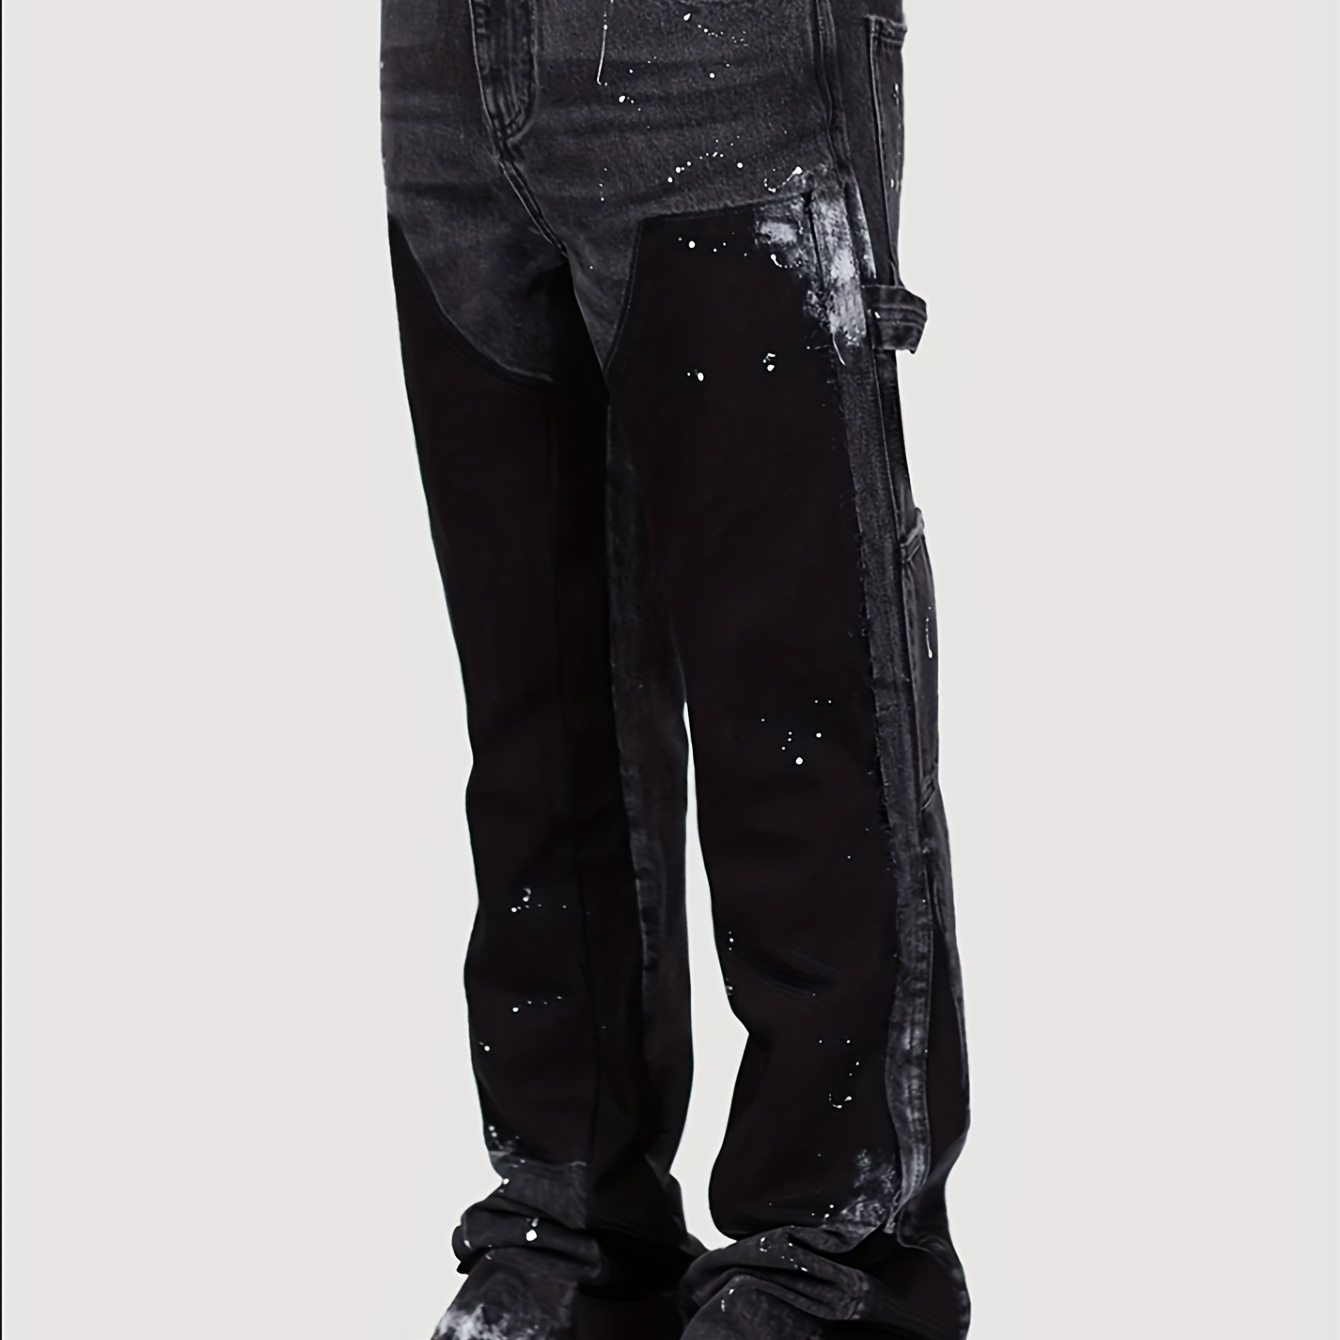 

Men's Colorful Ink Denim Cargo Pants, Fashion Patched Denim Stacked Flared Pants, Street Style, All Seasons